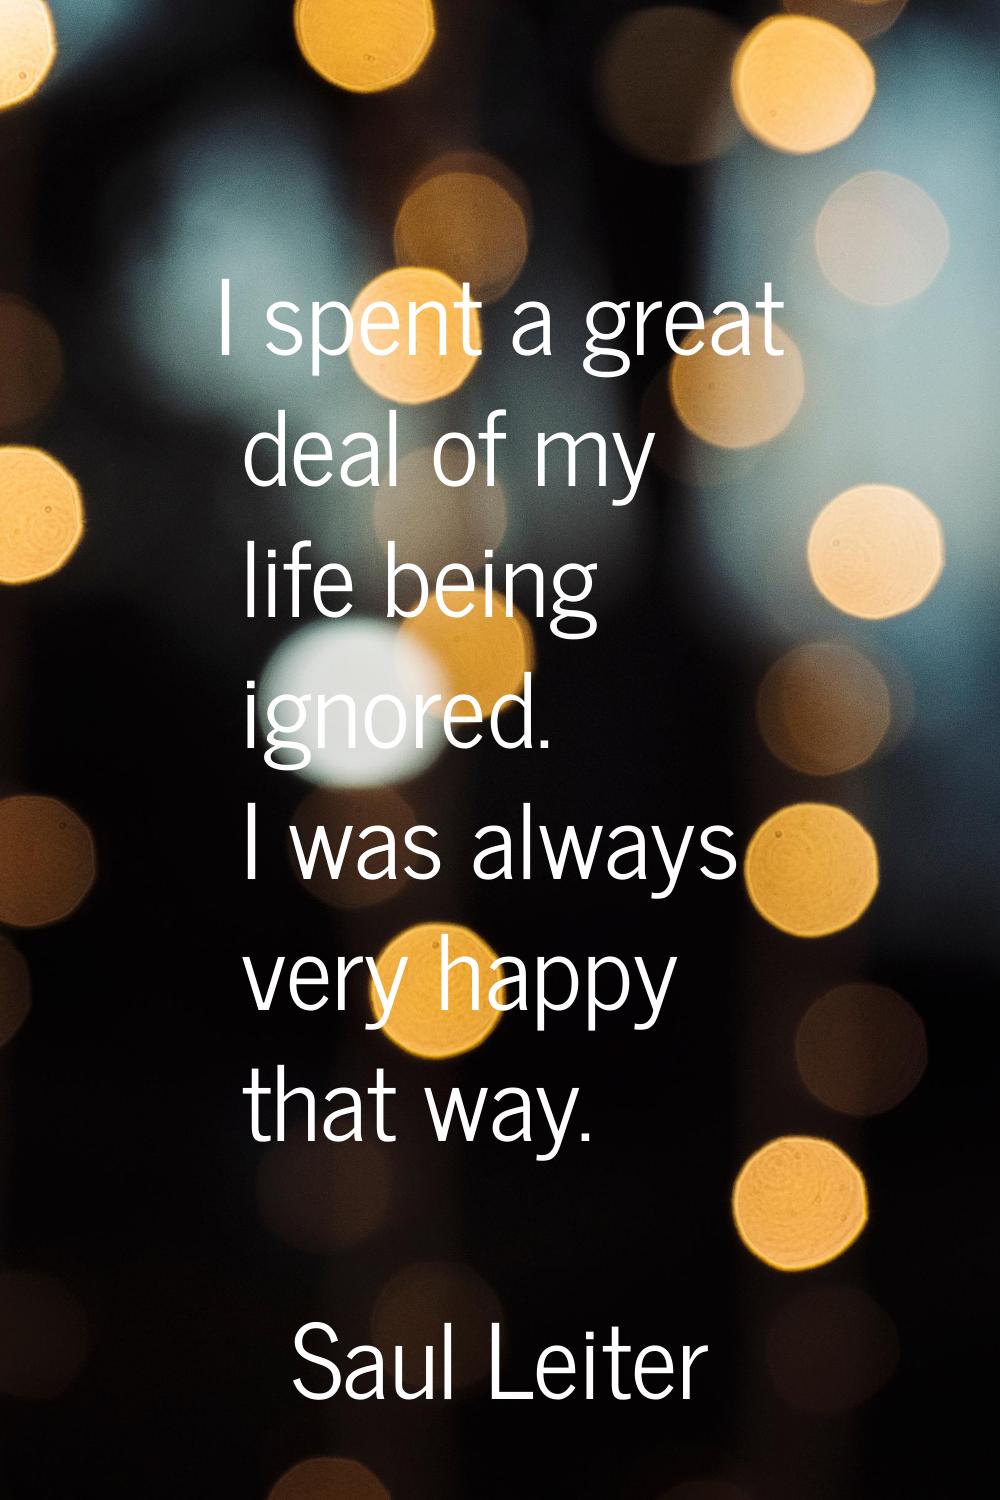 I spent a great deal of my life being ignored. I was always very happy that way.